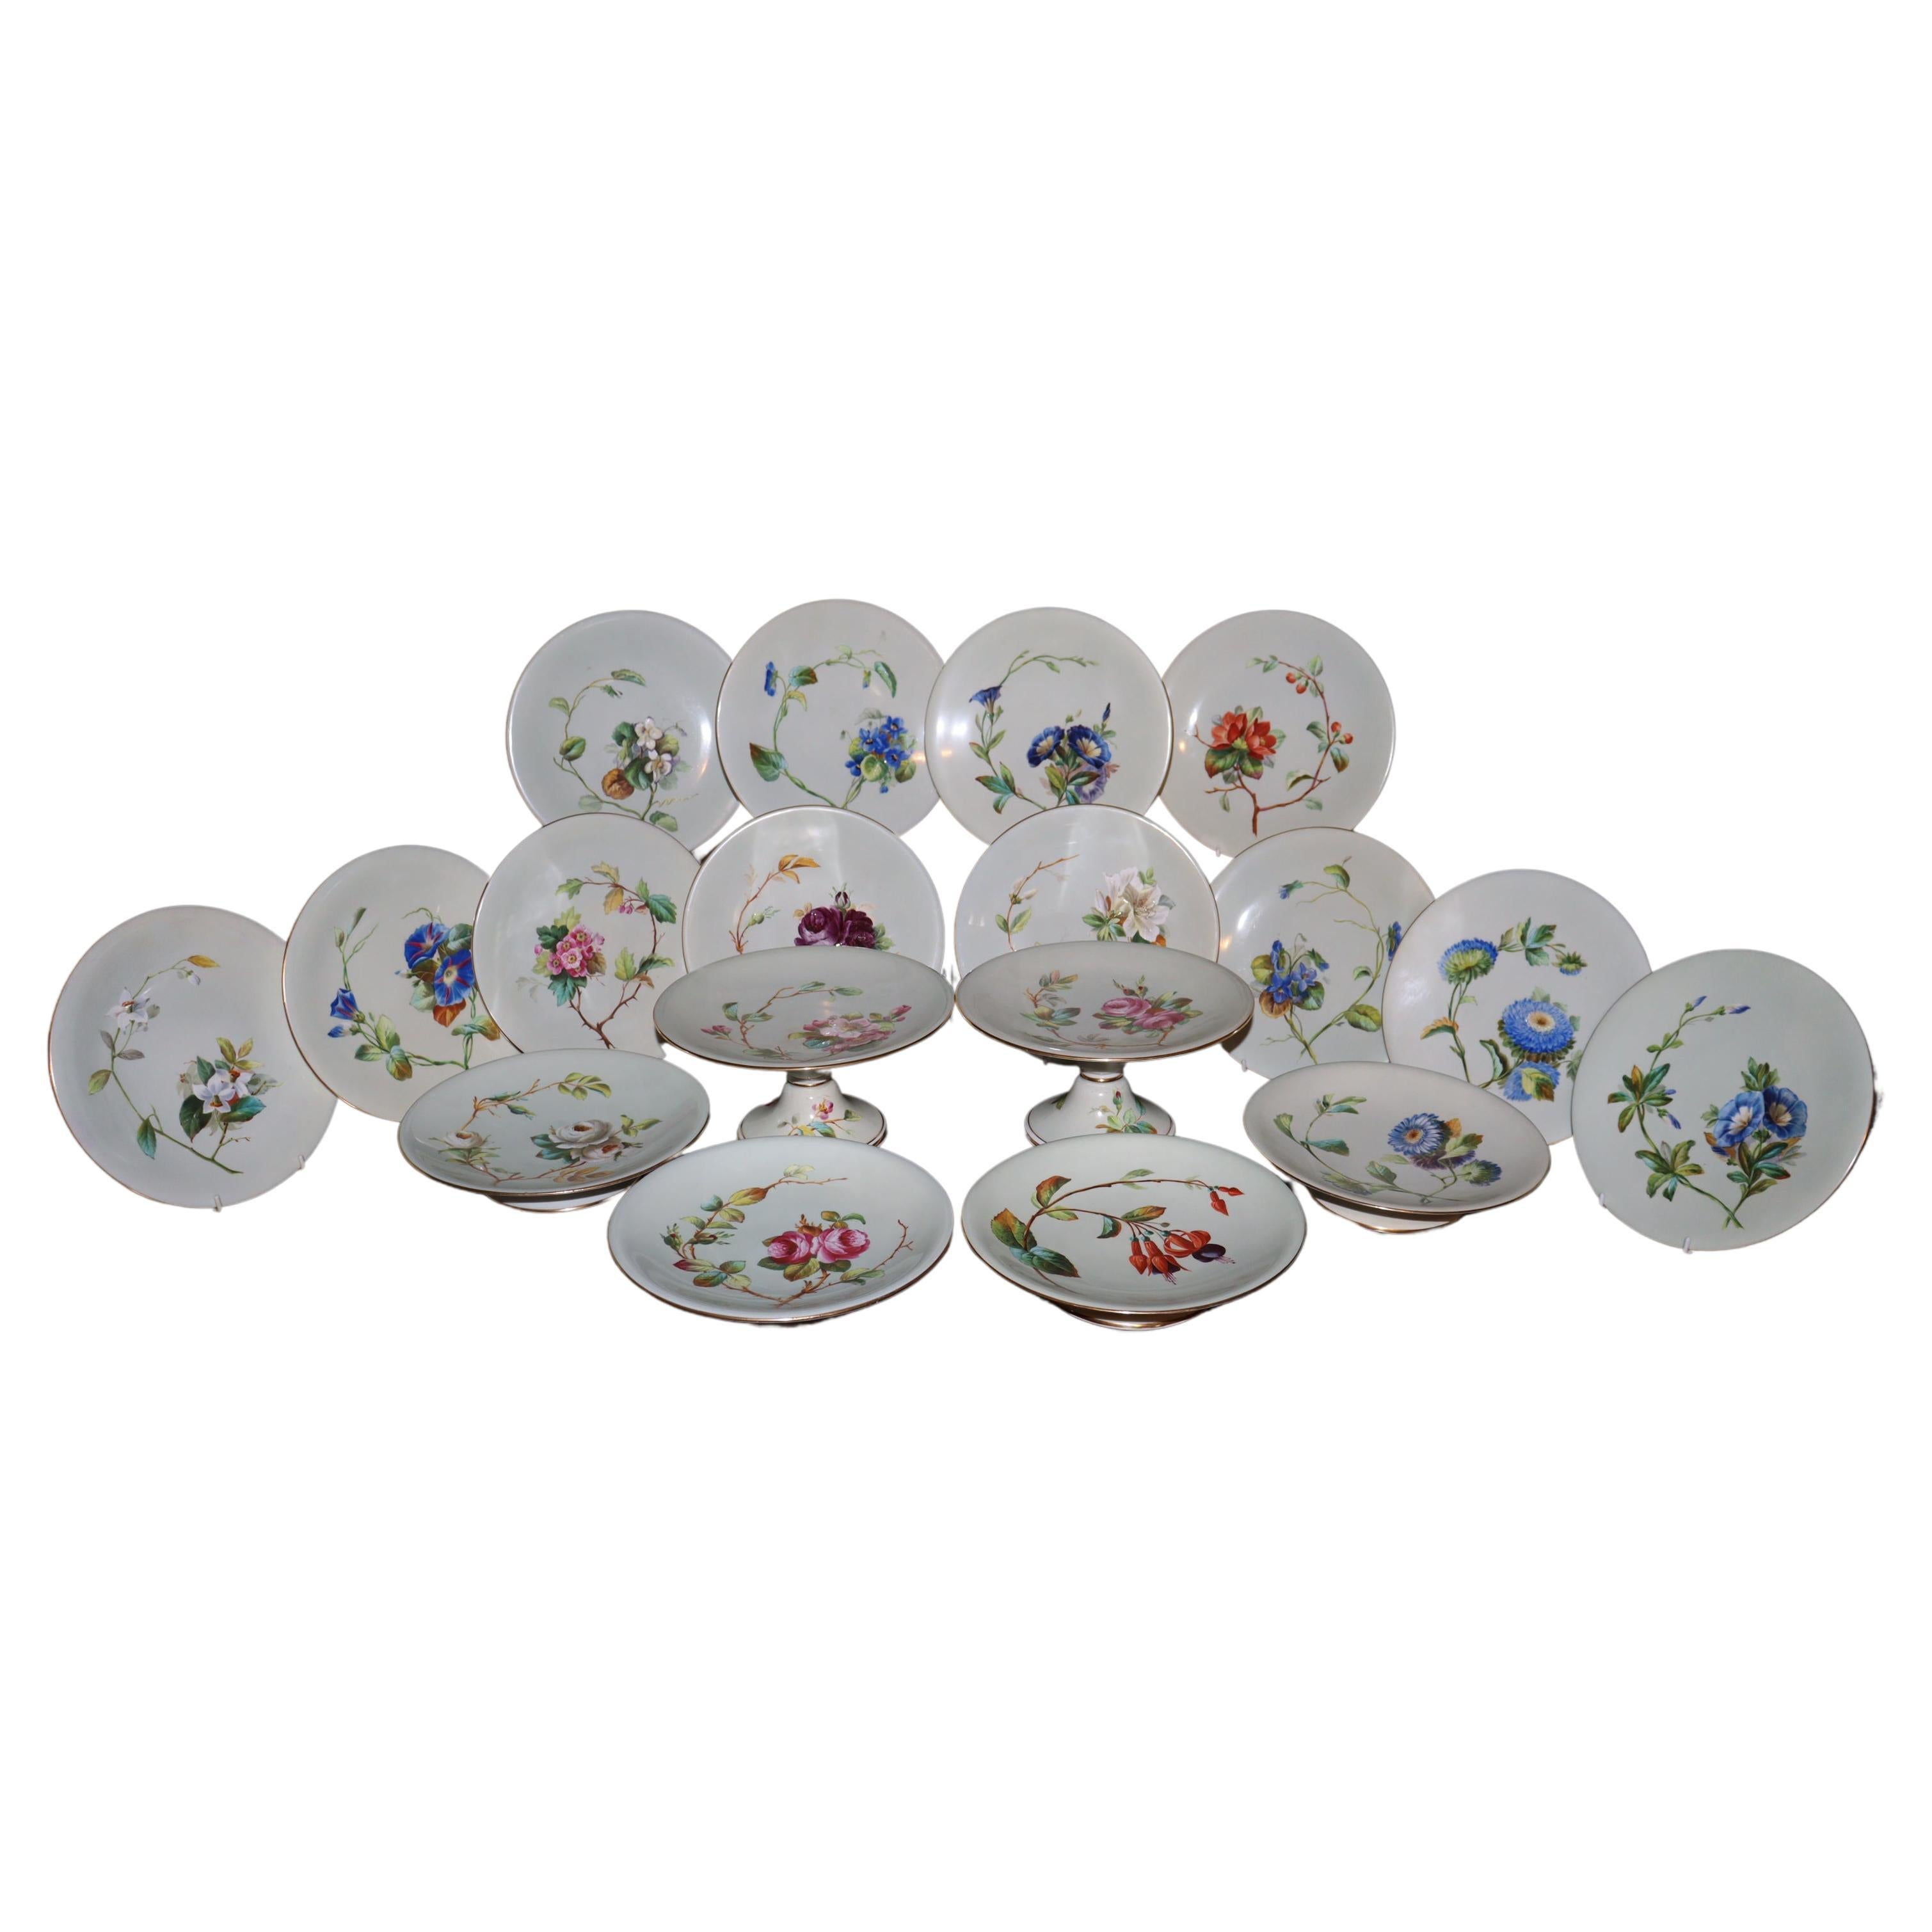 Eighteen piece hand painted porcelain dessert service by William Brownfield For Sale